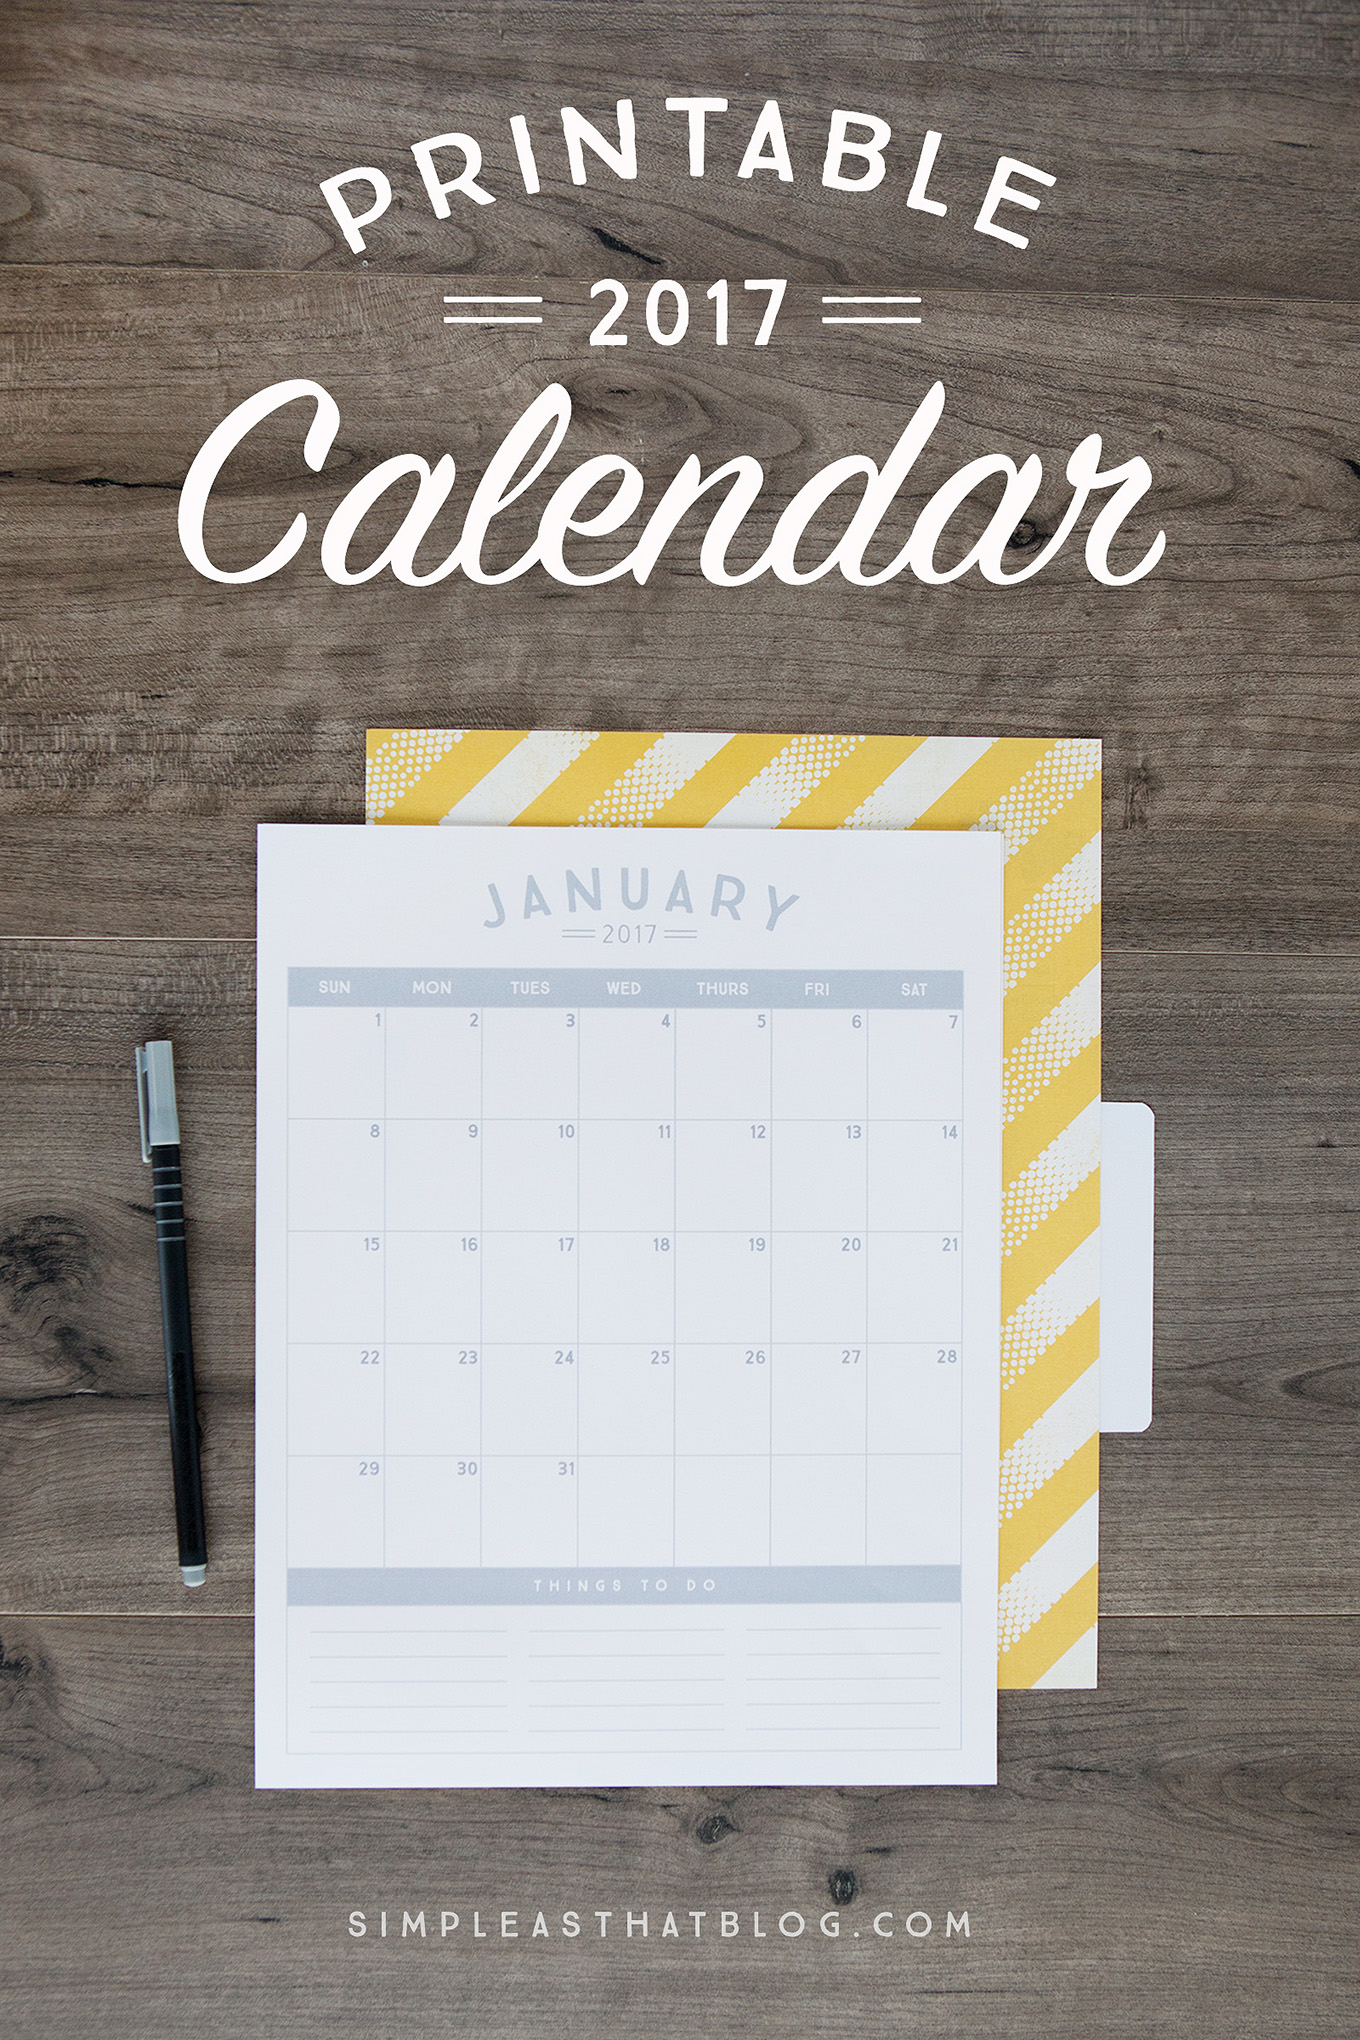 Get organized in the New Year with these 2017 Printable Calendars – available in 6 gorgeous colors!